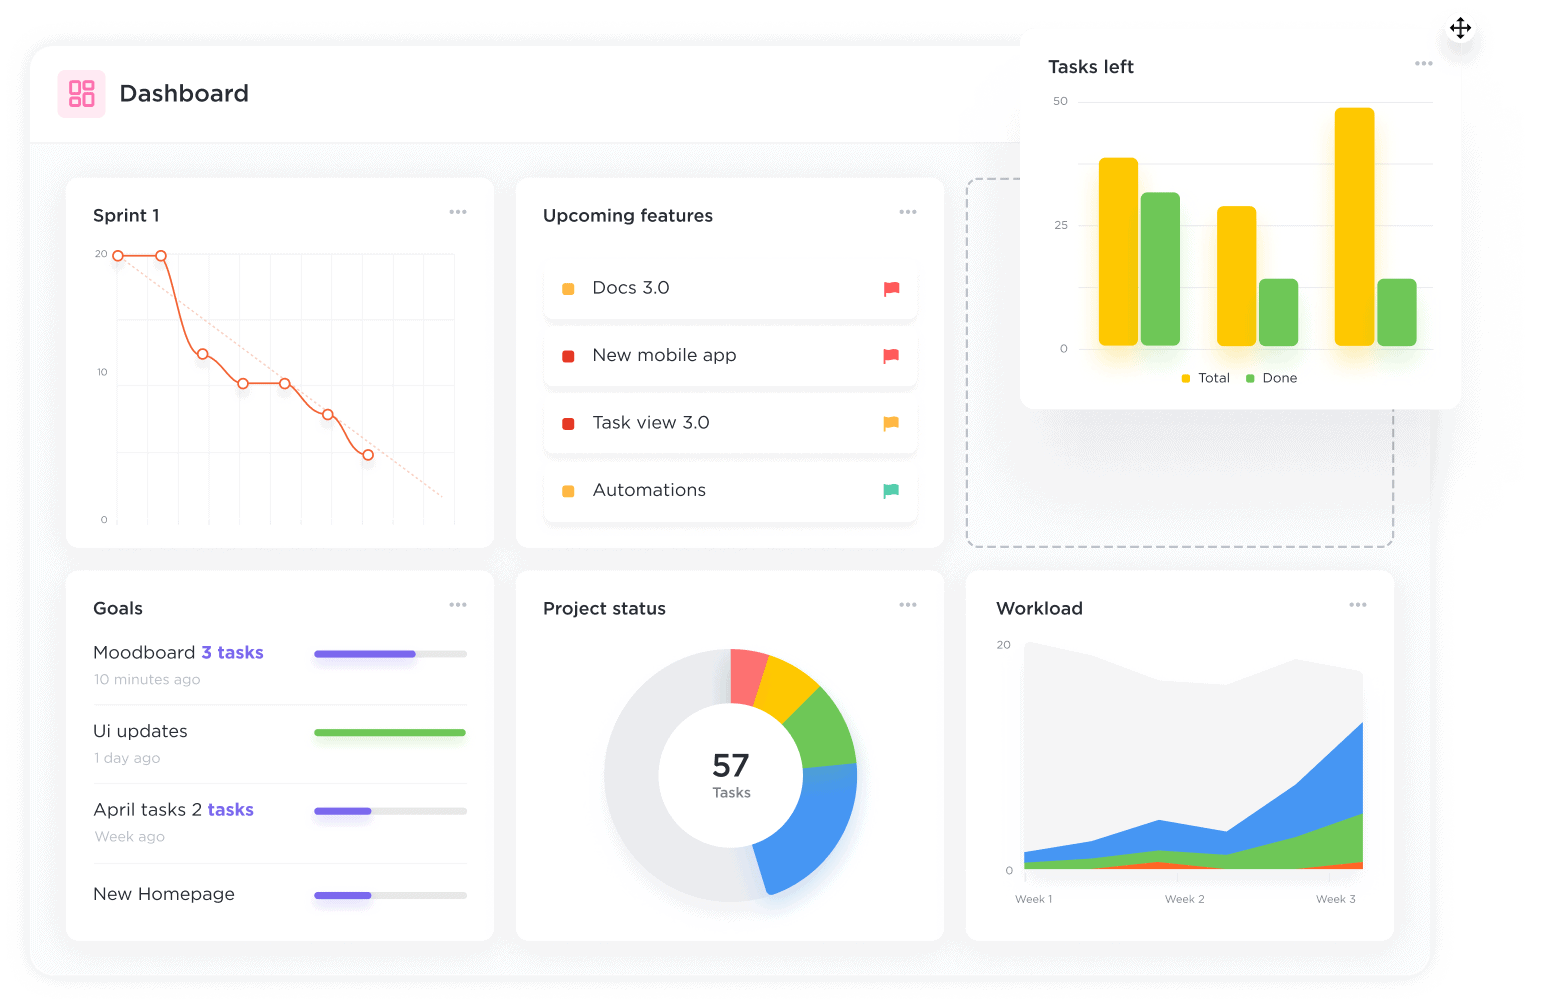 See everything at a glance with Dashboards.